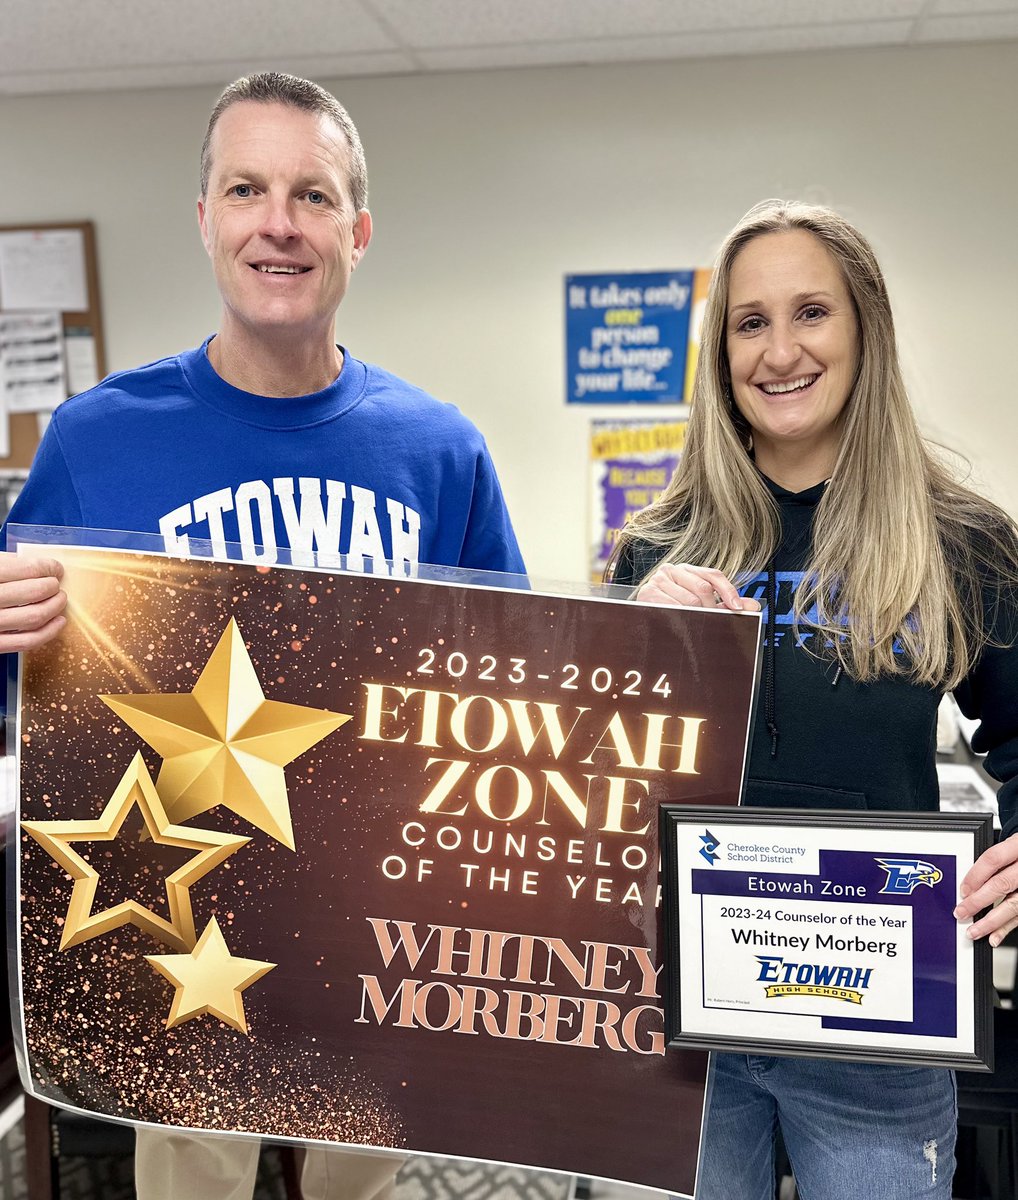 Congratulations to EHS’s Whitney Morberg for being named Etowah Zone Counselor of the year!